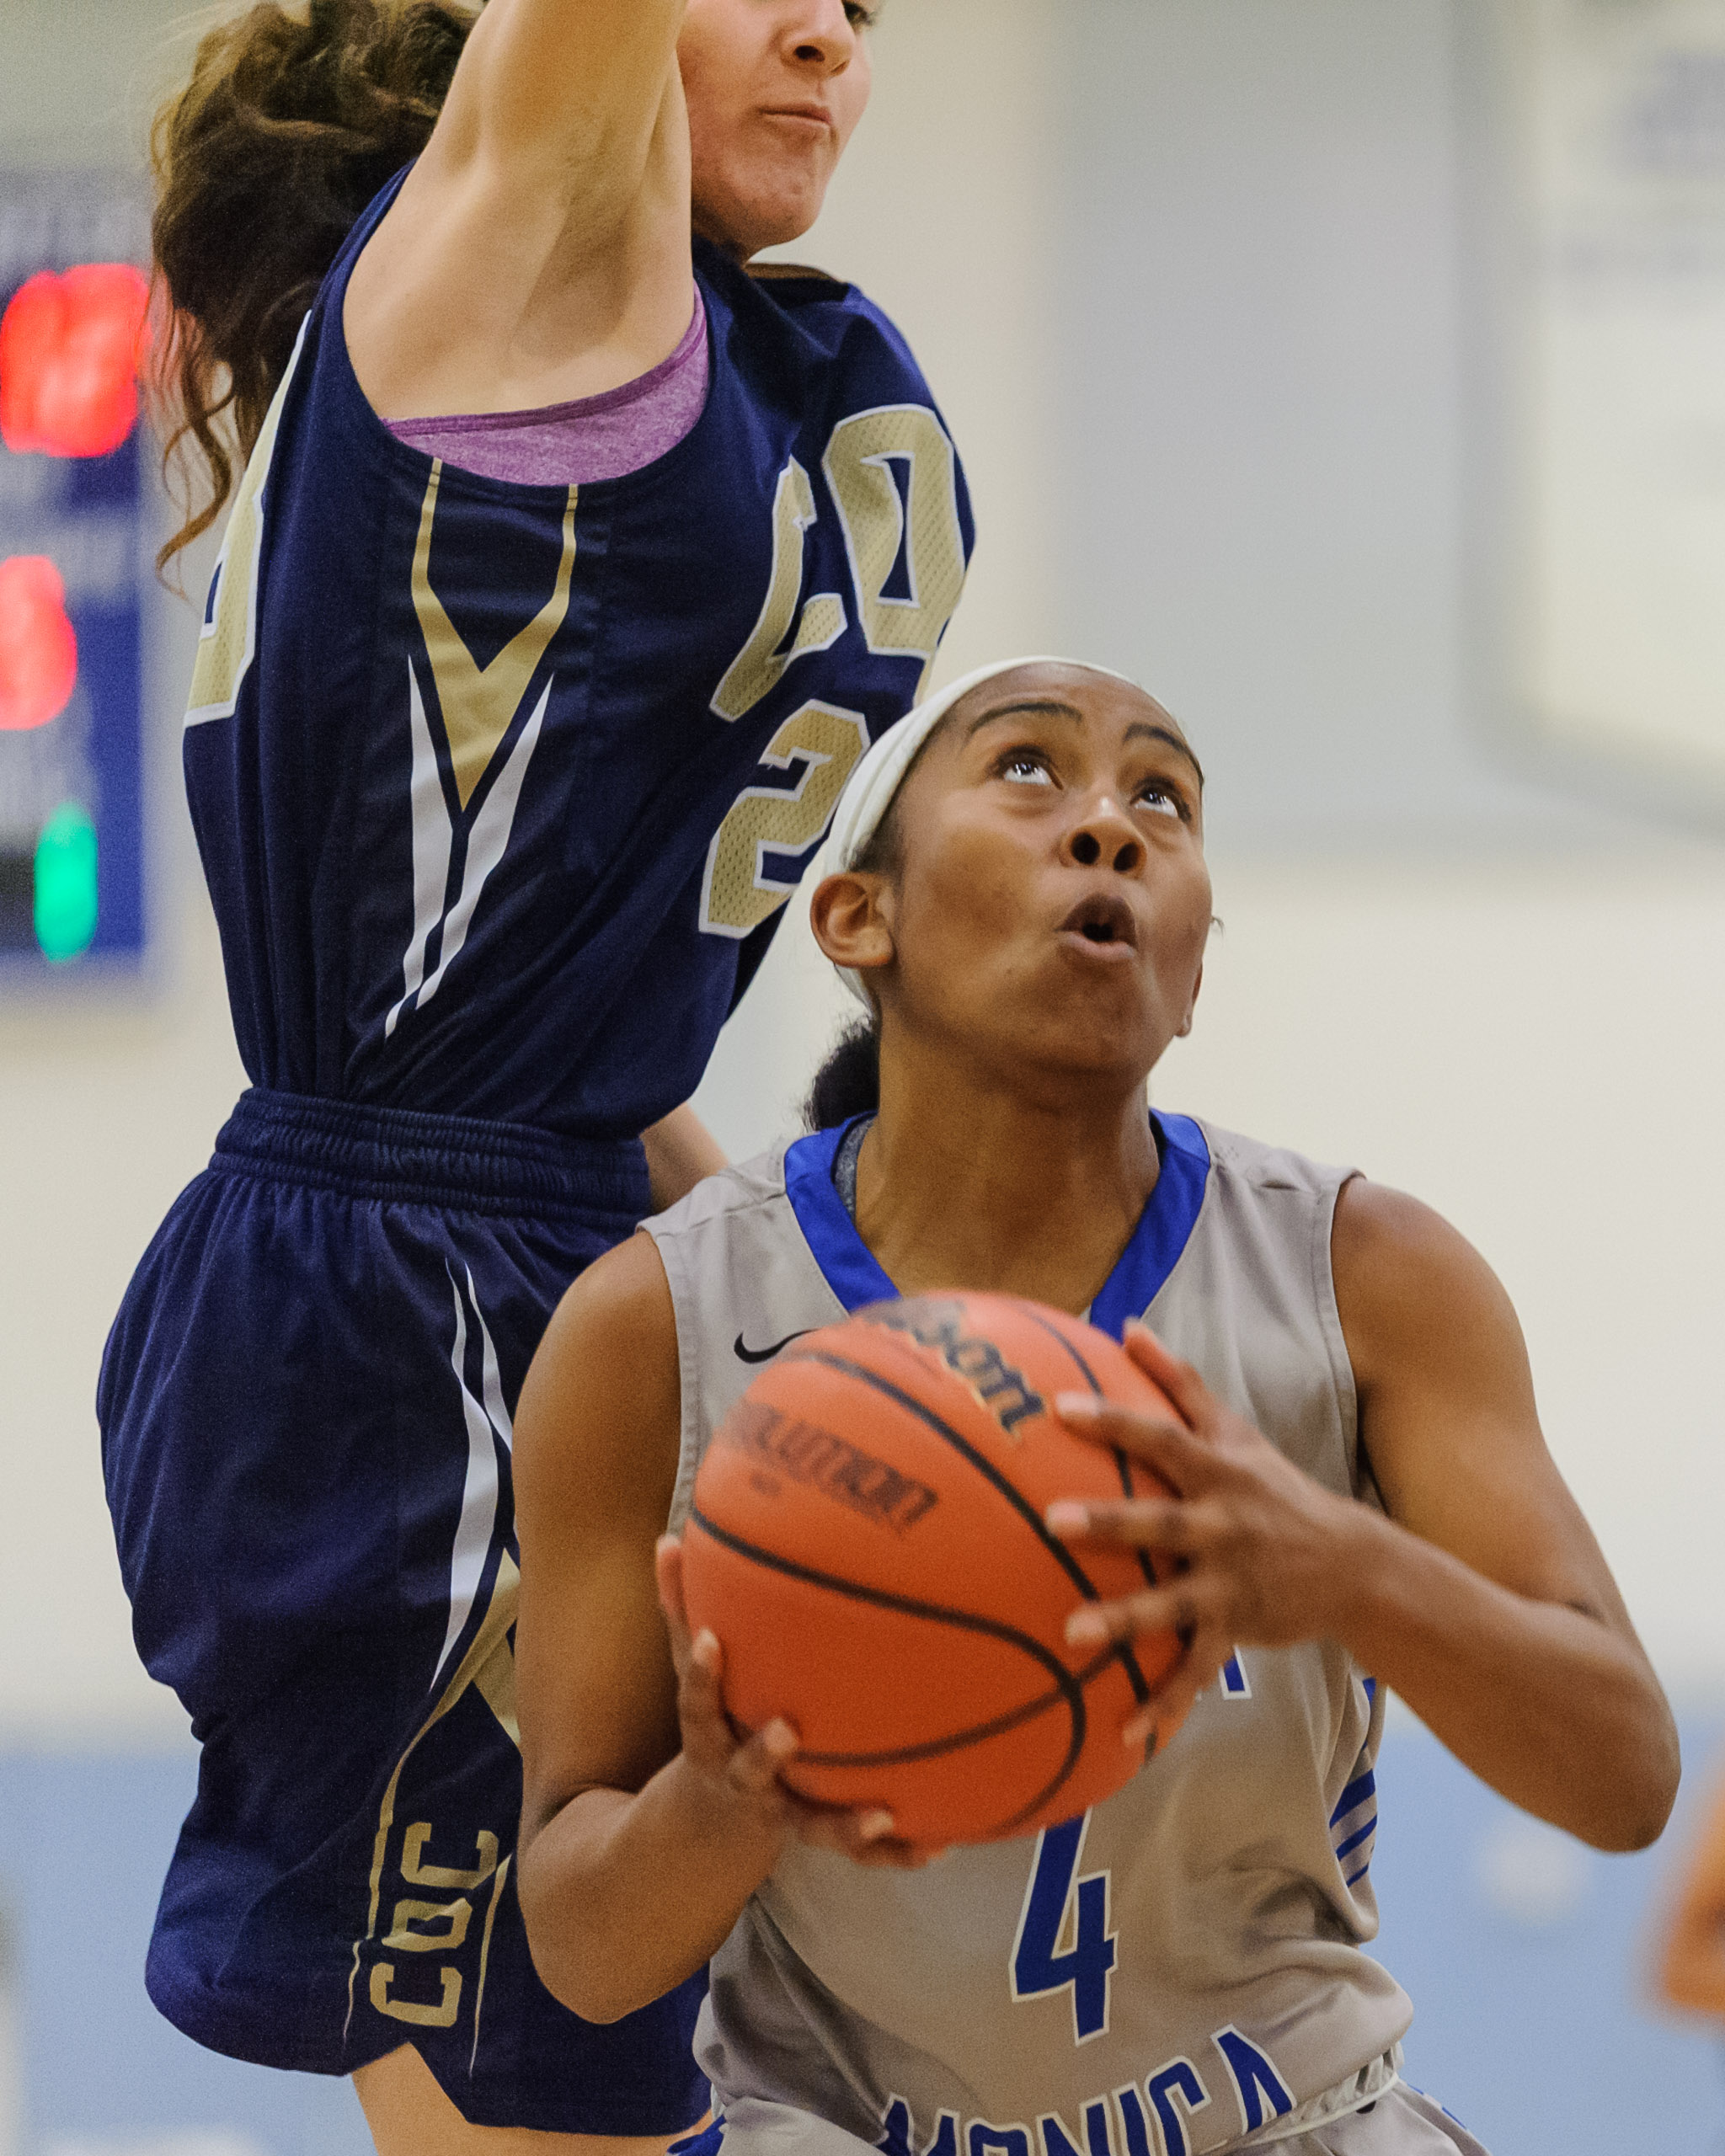  Lisa Hall (4) of Santa Monica College drives into the lane for a layup. The Santa Monica College Corsairs lose the game 108-70 to the College of the Canyons Cougars. The game was held at the SMC Pavilion at the Santa Monica College Main Campus in Sa